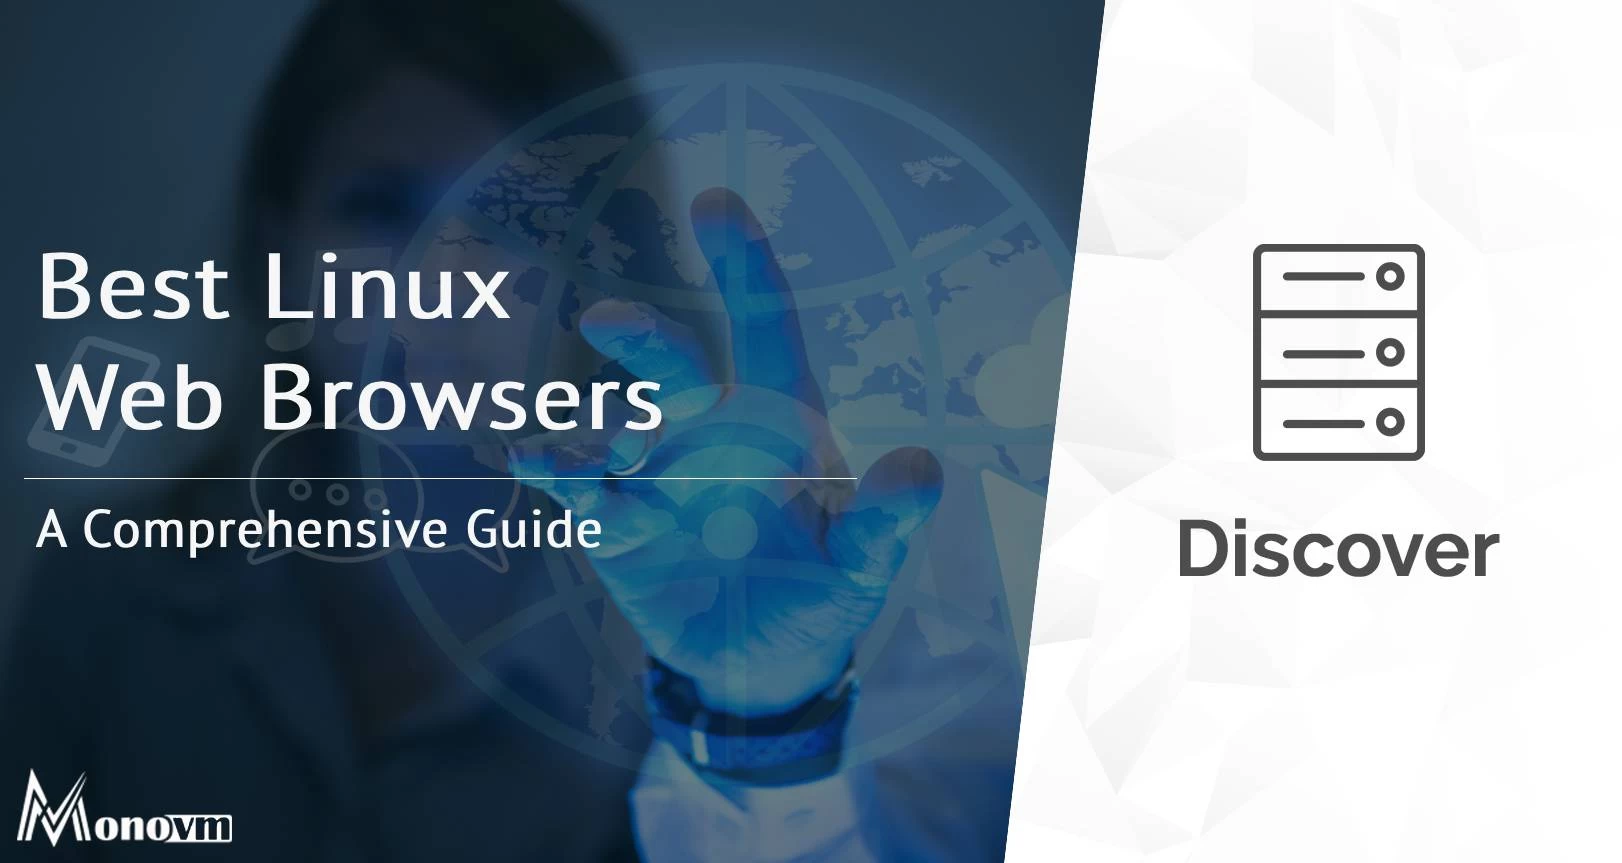 Best Linux Web Browsers for 2023: A Comprehensive Guide